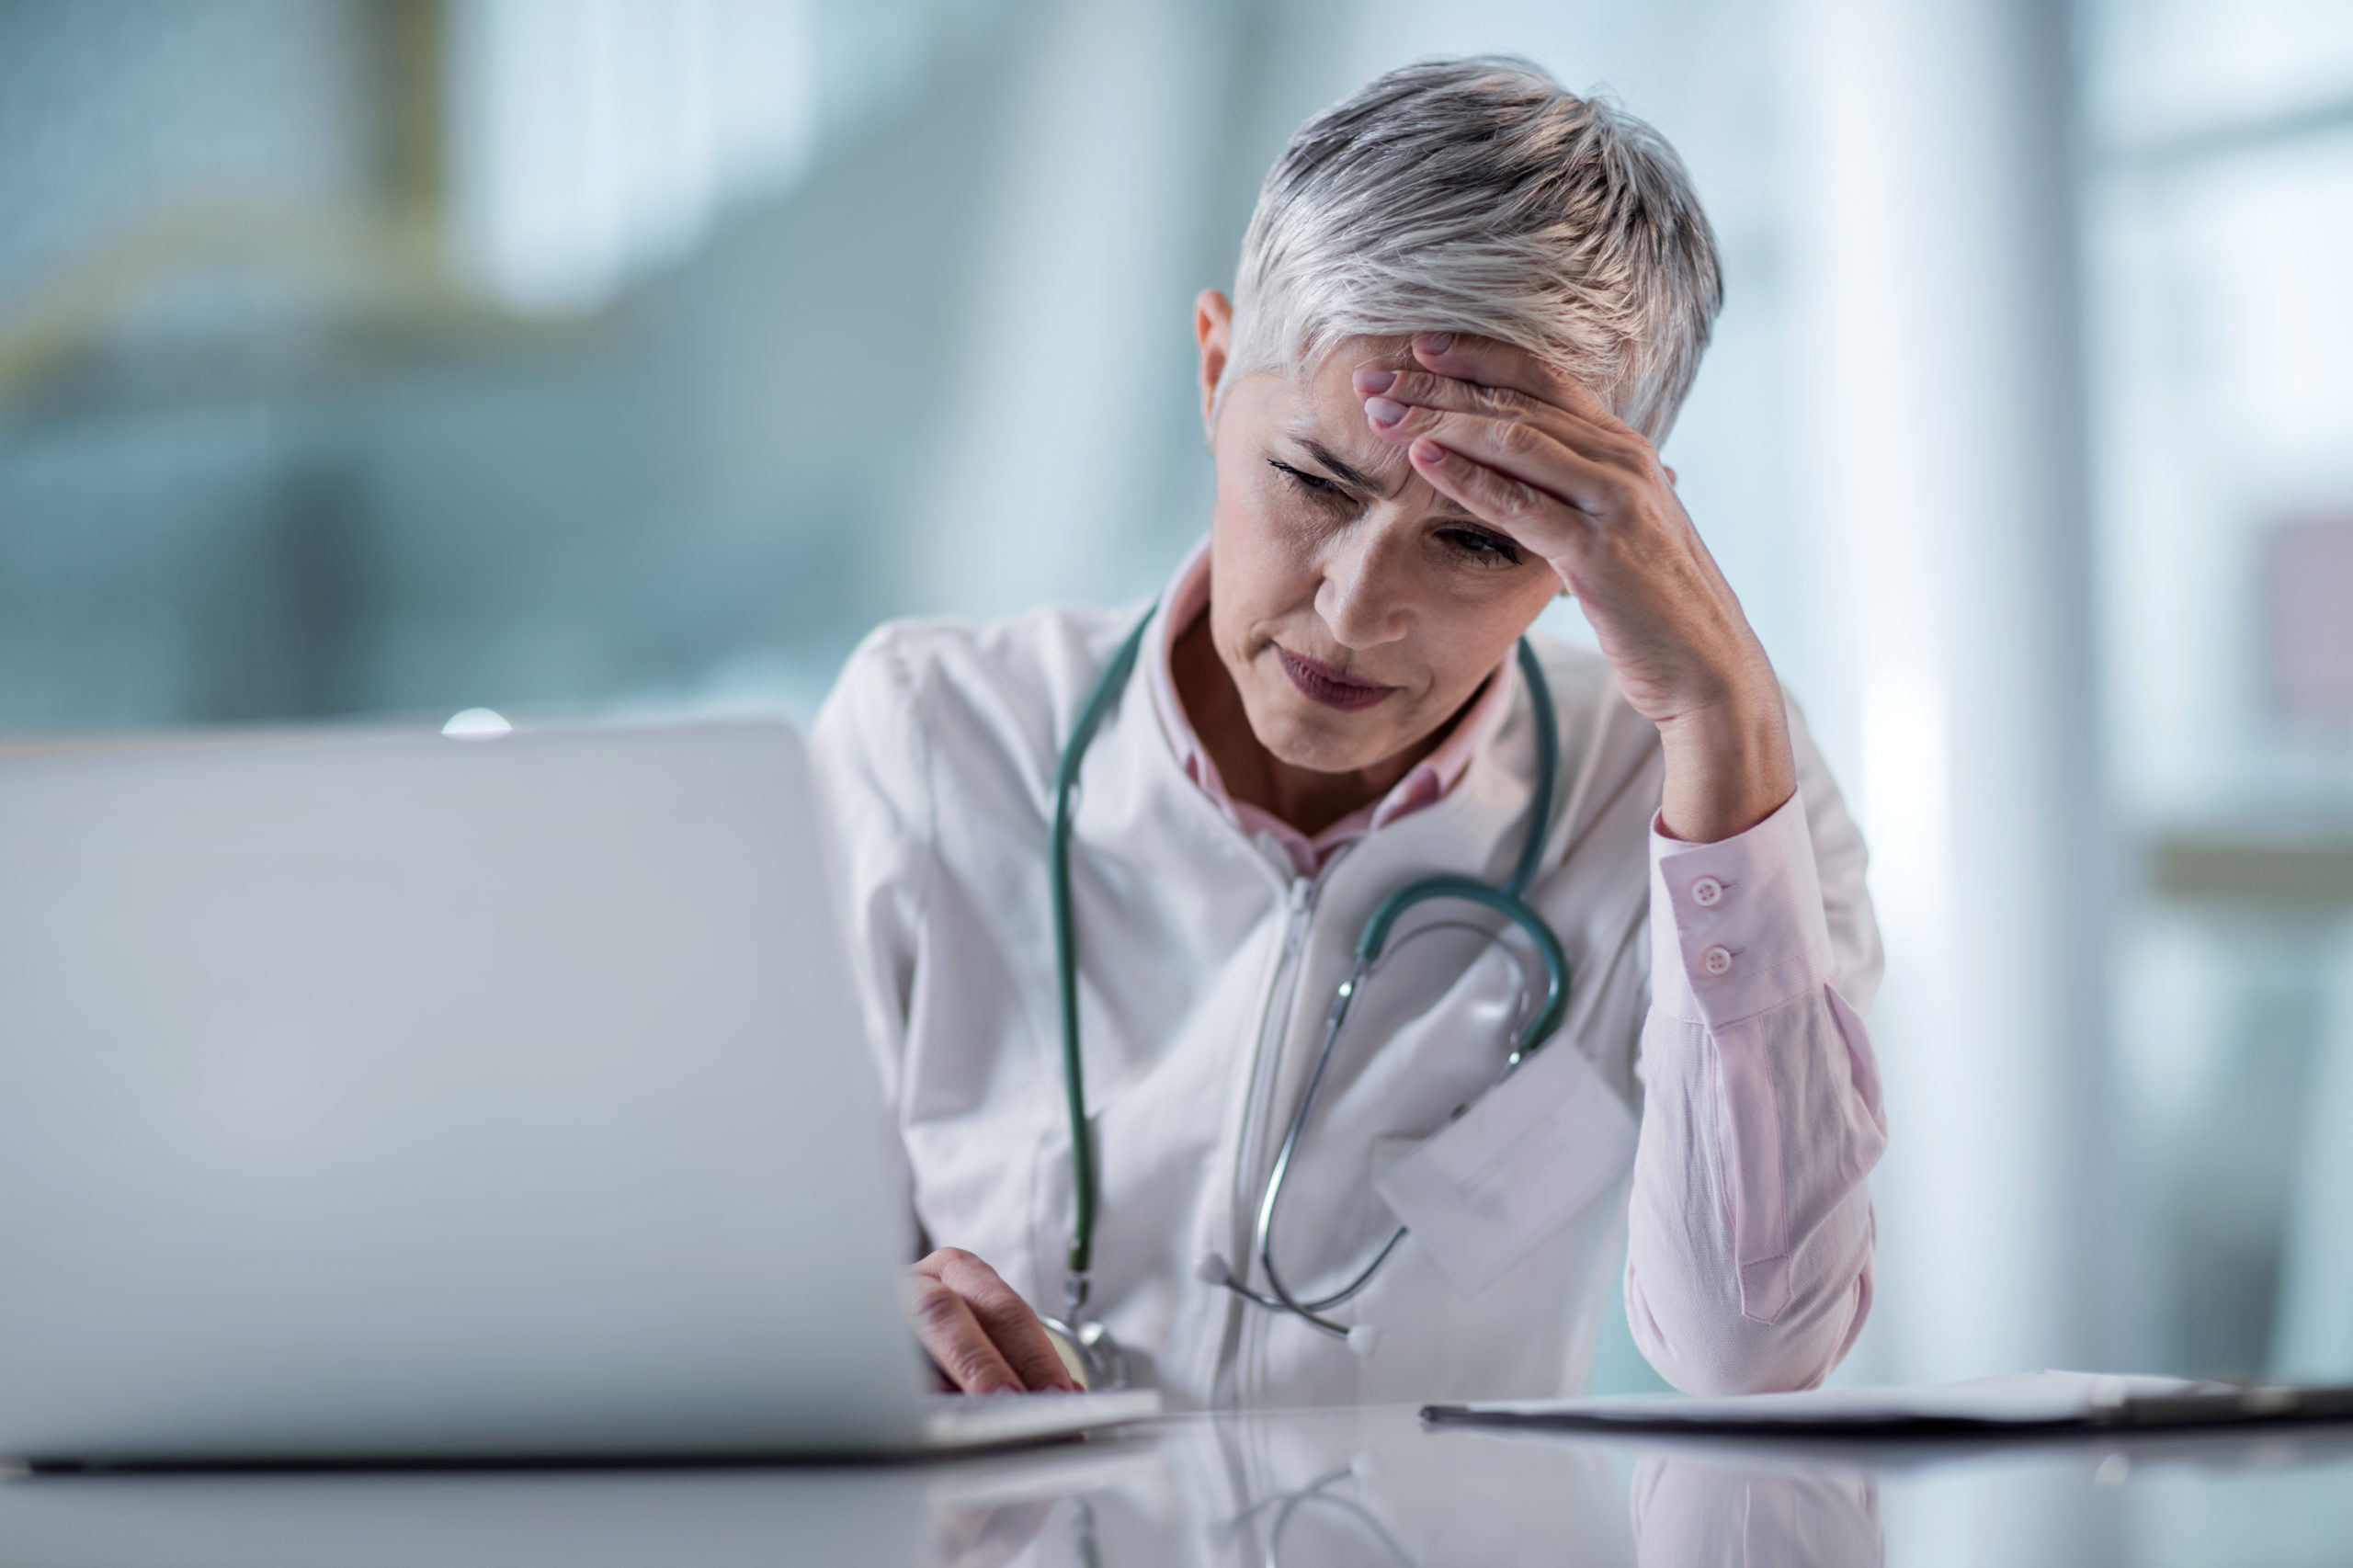 How to ease clinician cognitive overload